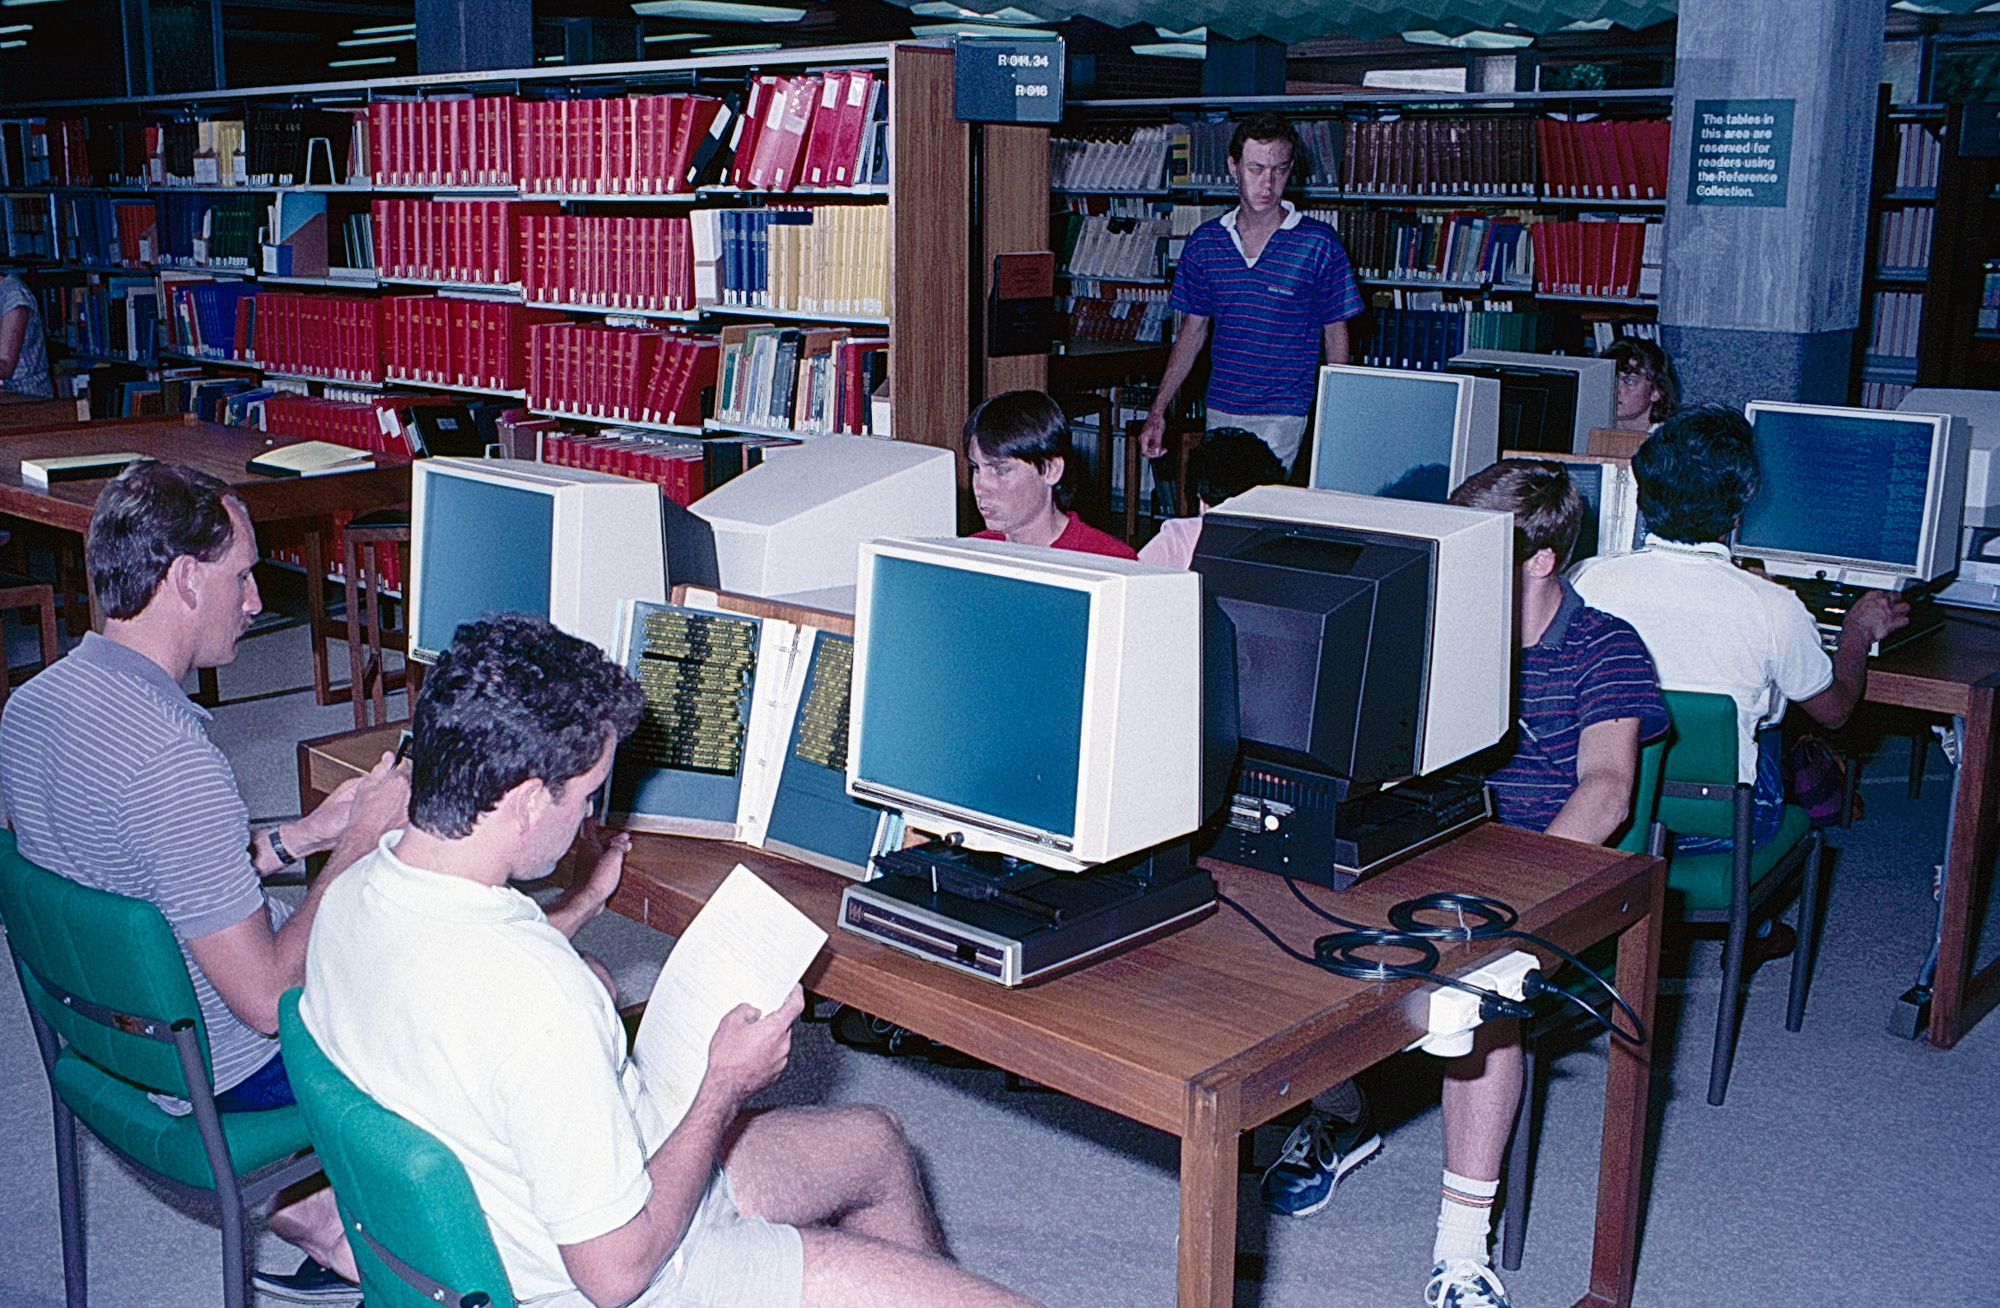 students at catalogue machines, library bookshelves in the background.